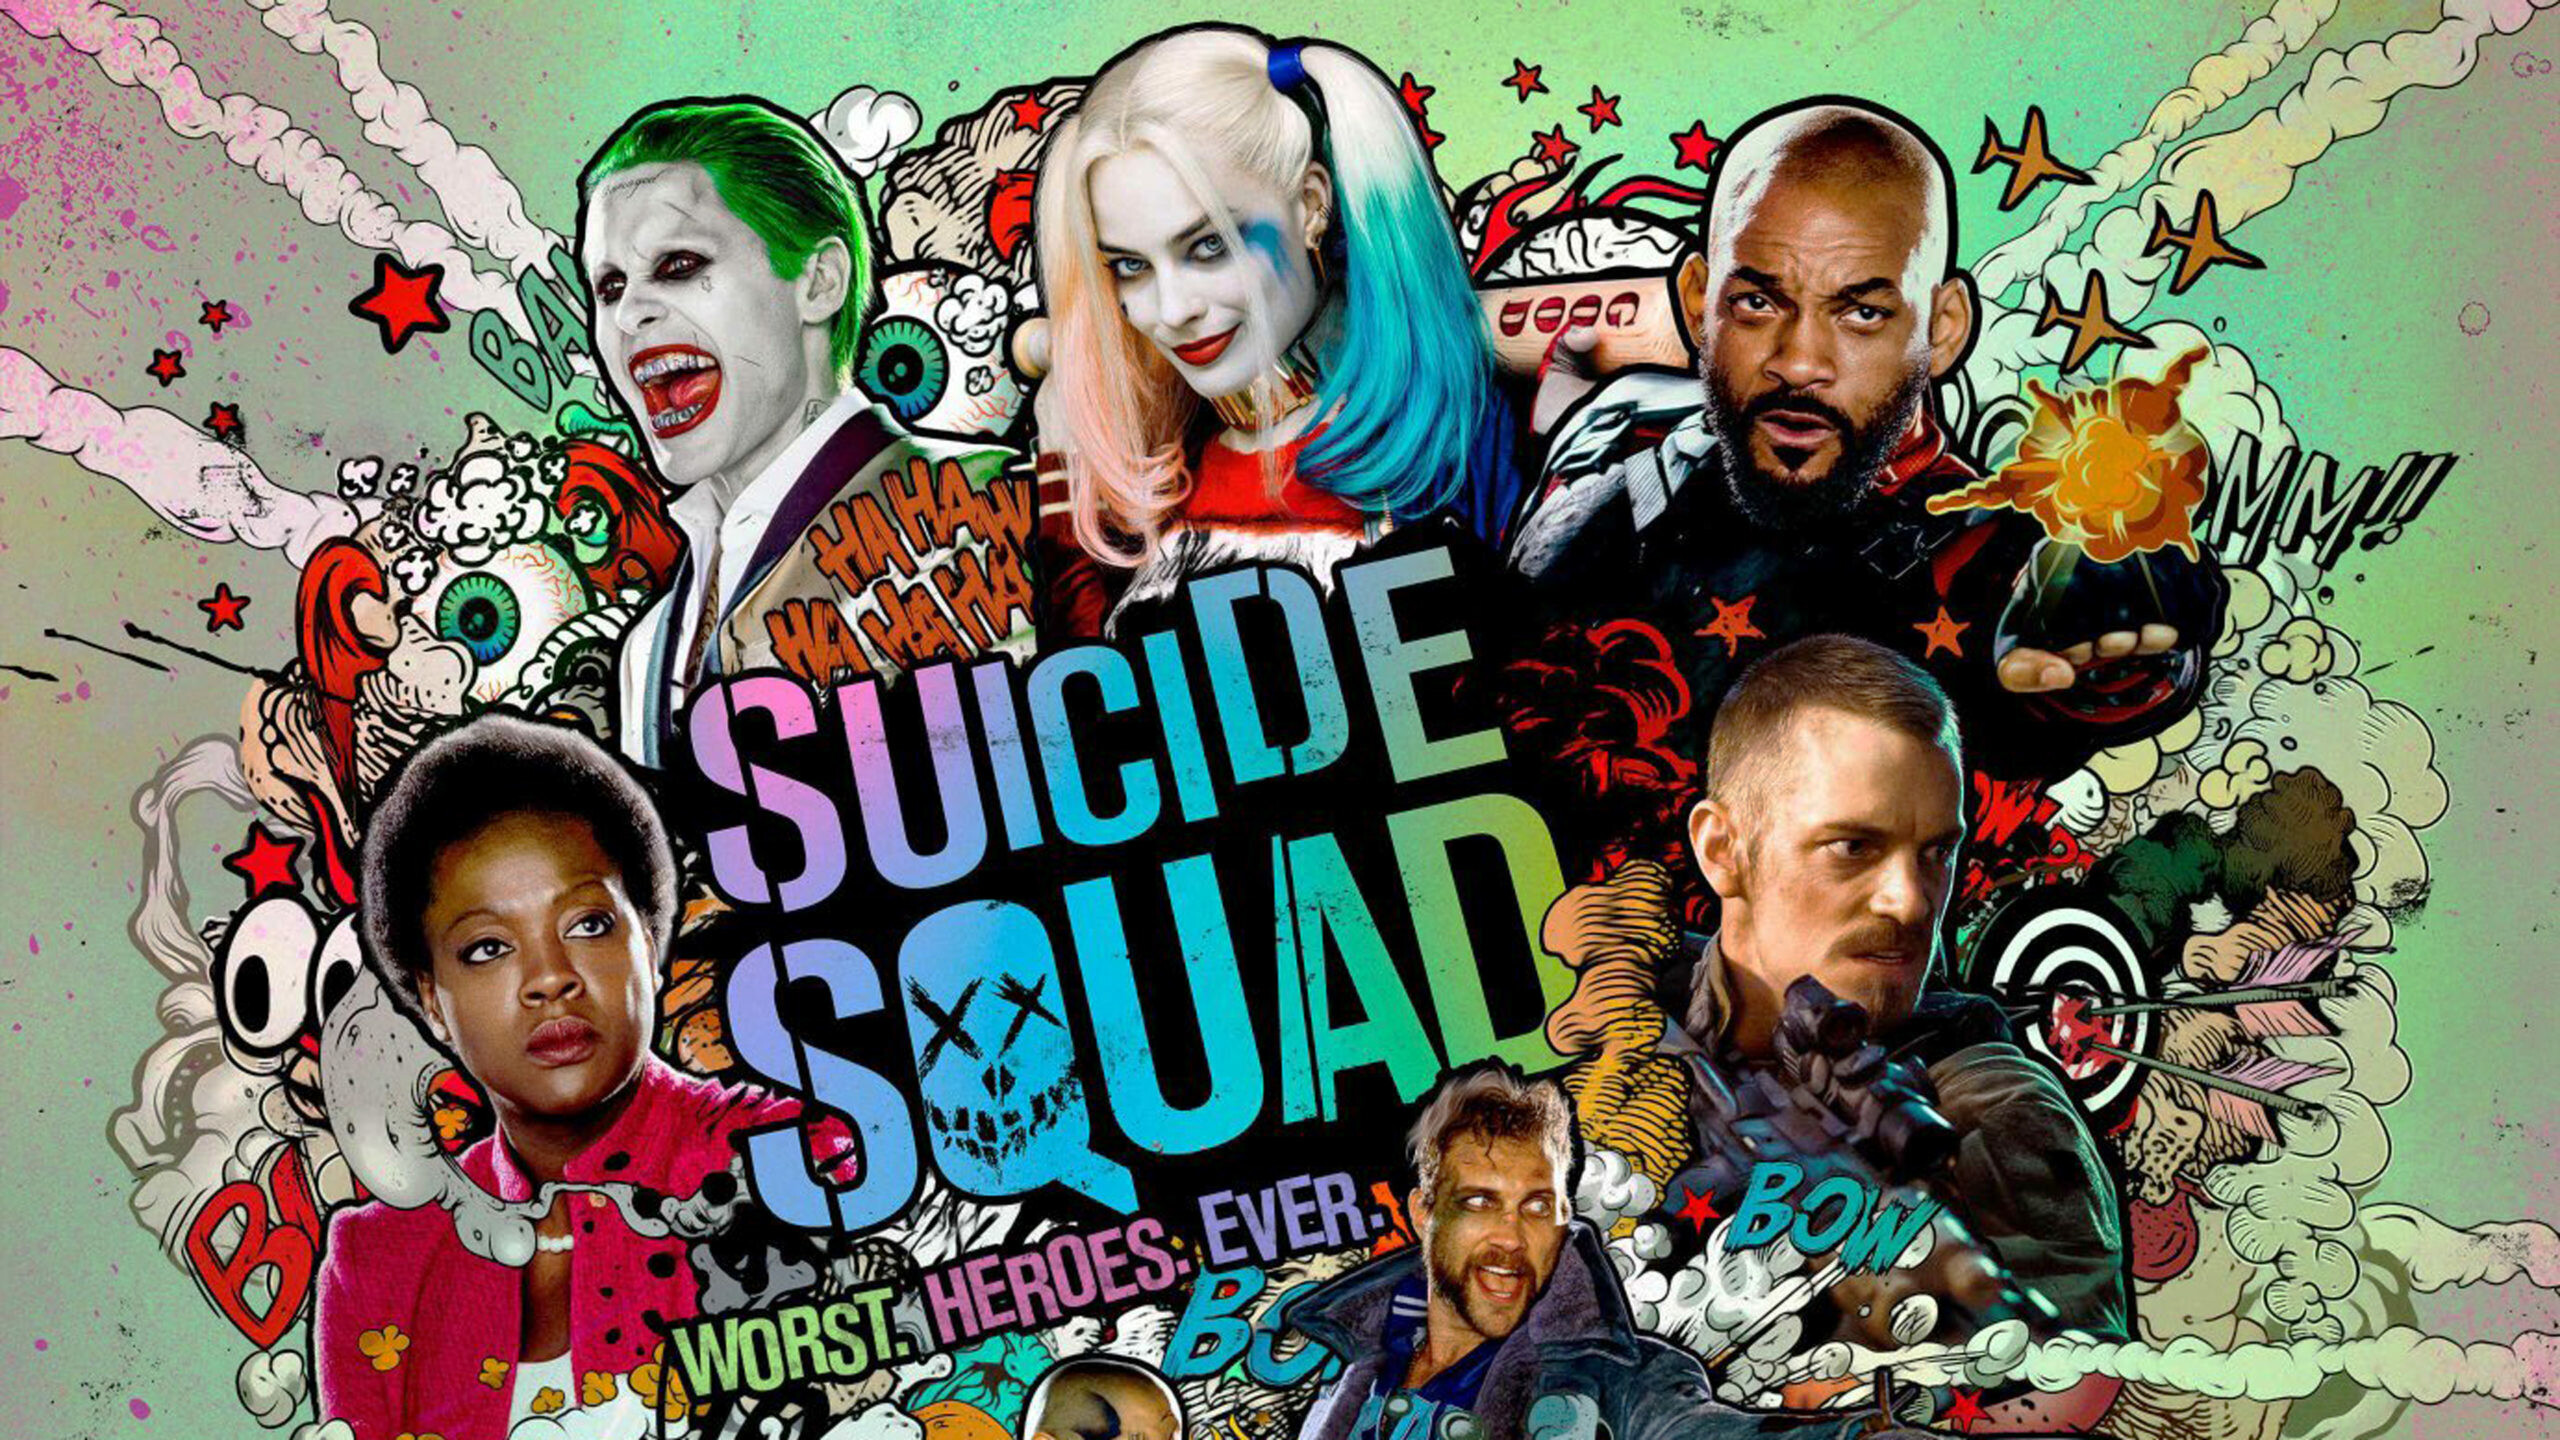 Suicide Squad: Theatrical release poster, A 2016 superhero film. 2560x1440 HD Background.